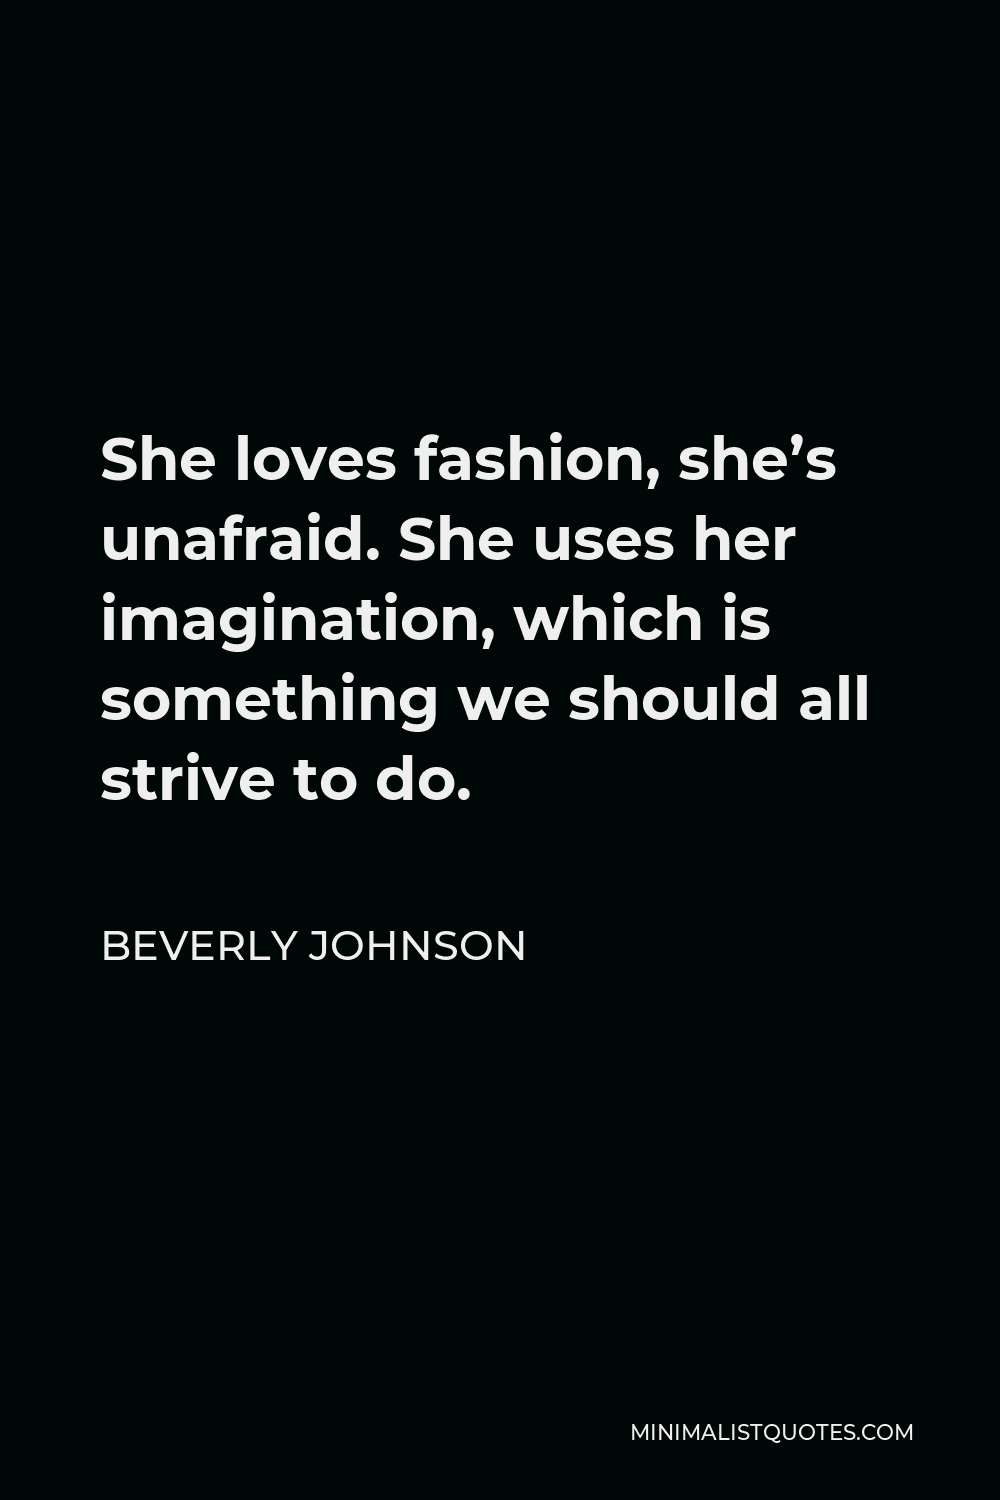 Beverly Johnson Quote - She loves fashion, she’s unafraid. She uses her imagination, which is something we should all strive to do.